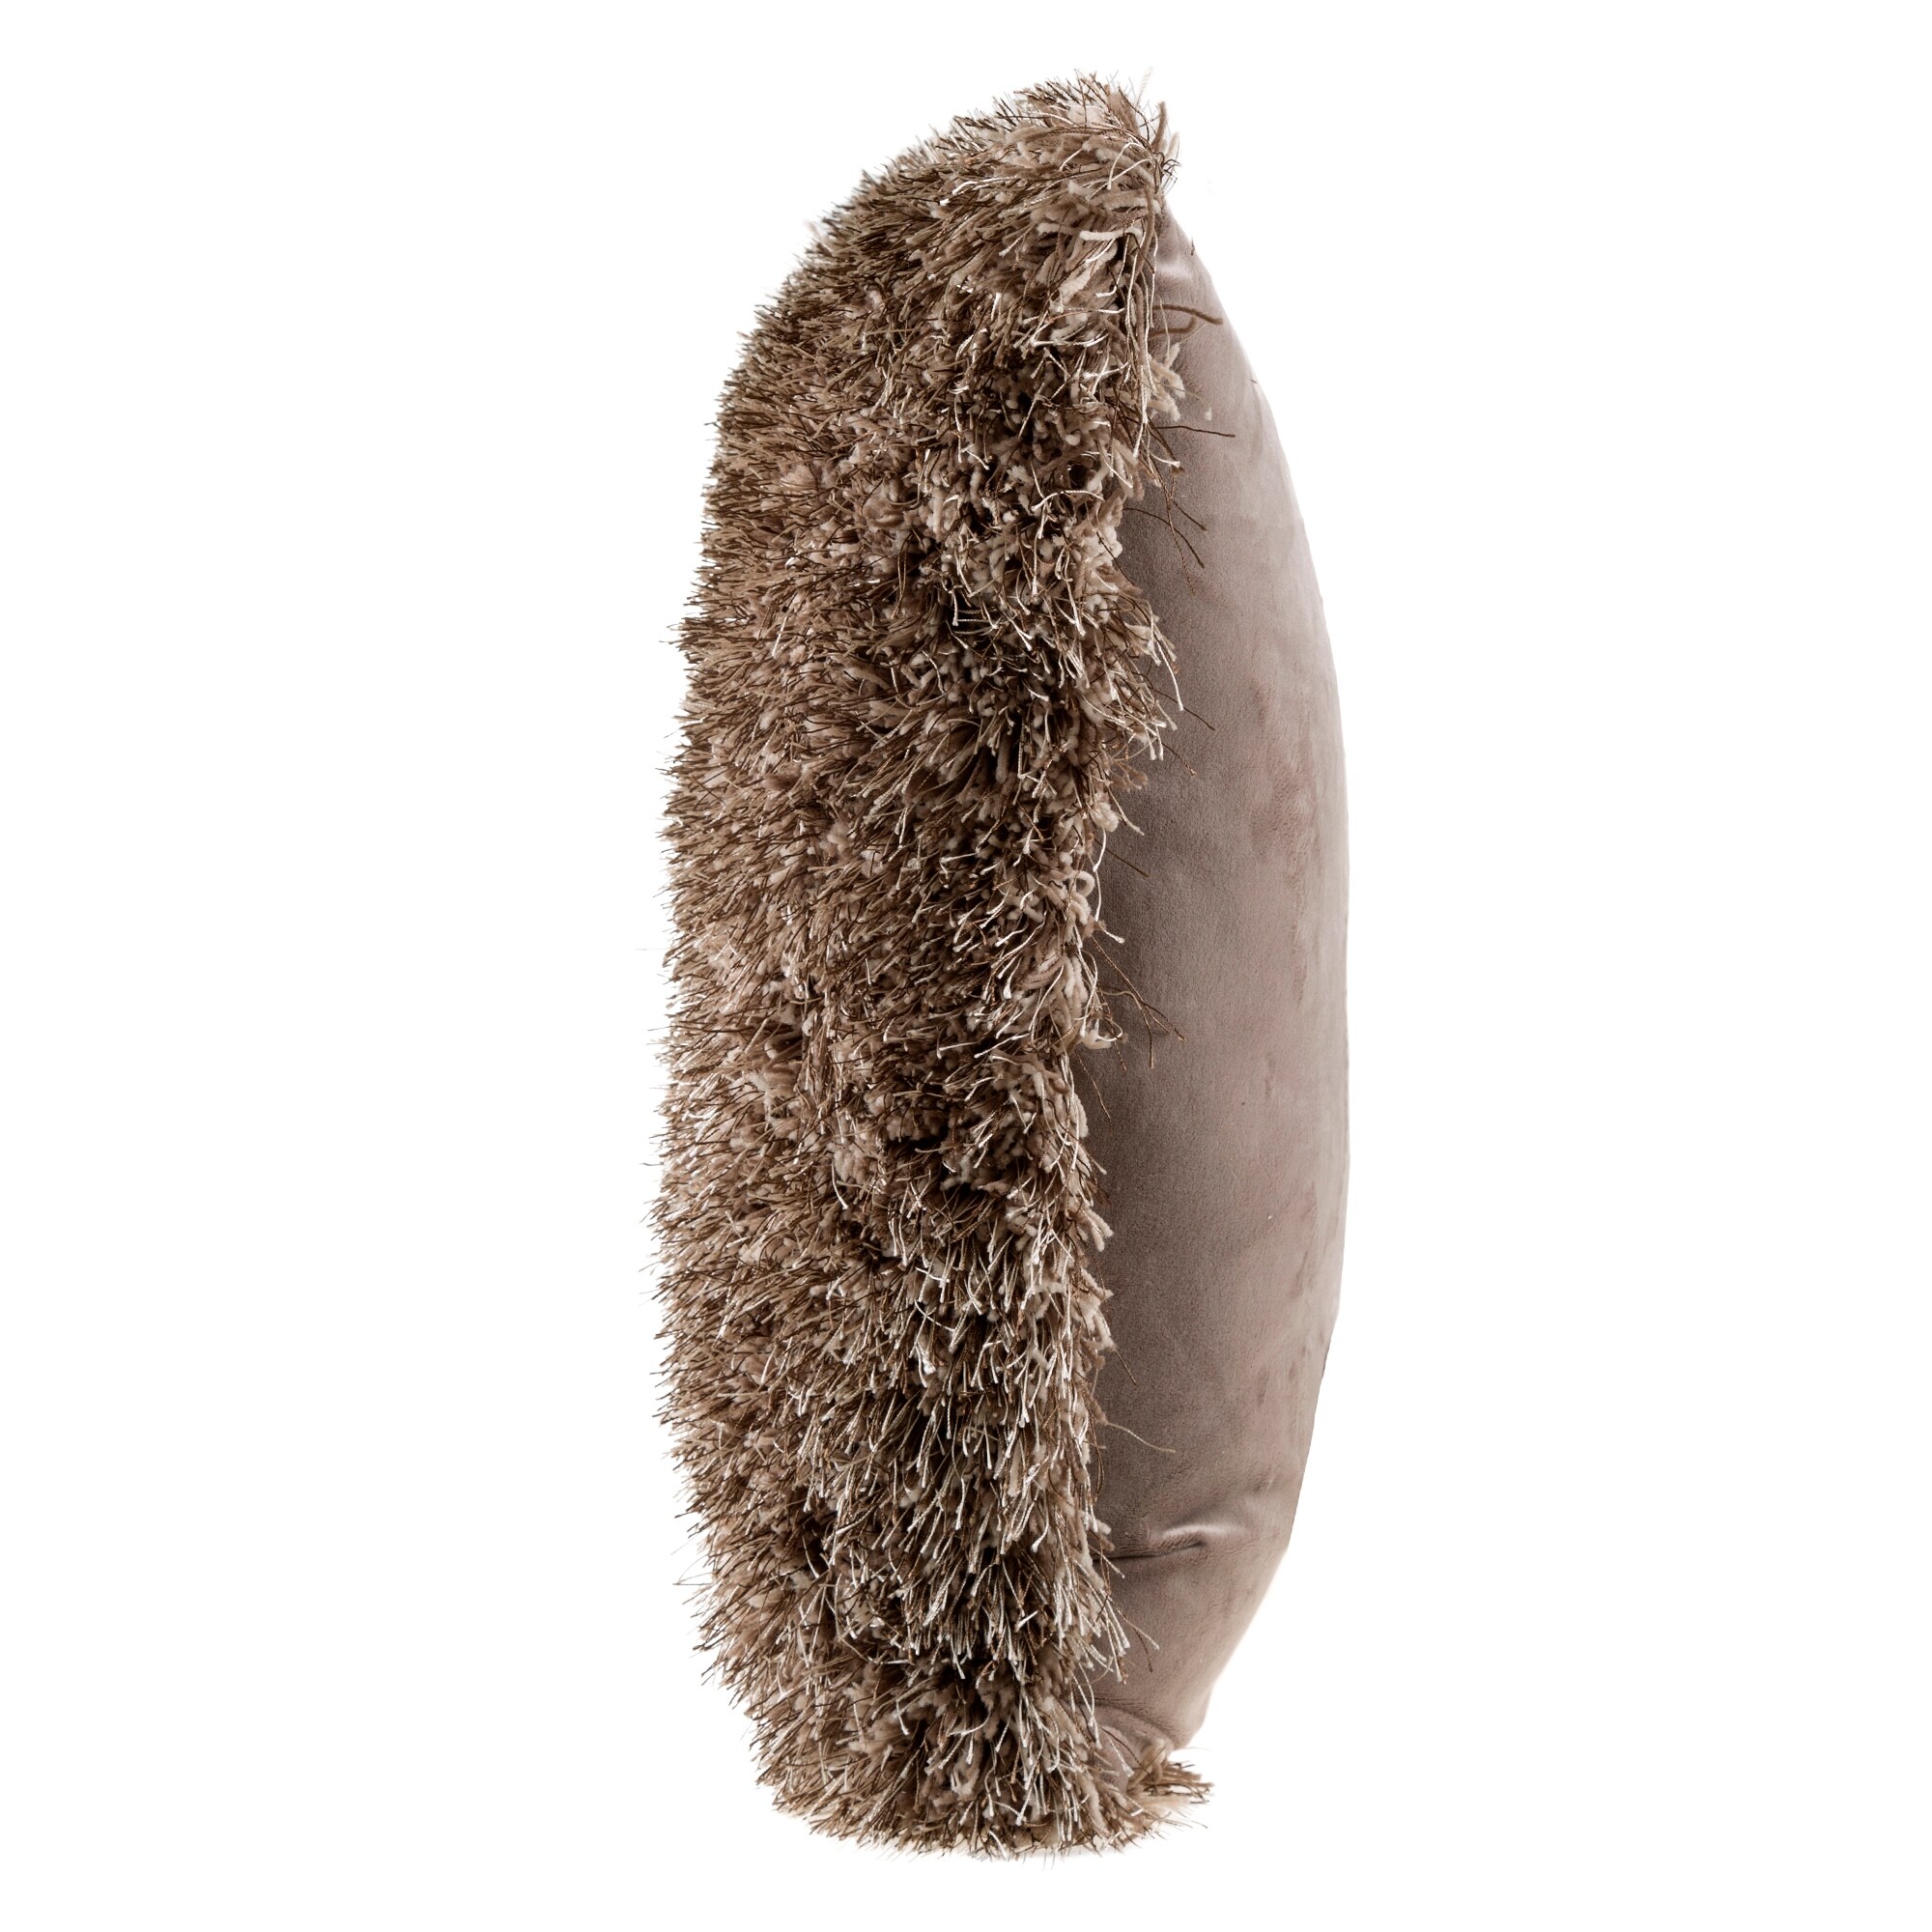 https://ak1.ostkcdn.com/images/products/is/images/direct/fcfb9fd21df5790bb50089c6196ef769c6e818da/Oversized-Floor-or-Throw-Pillow-Square-Shag-FauxFur-by-Windsor-Home.jpg